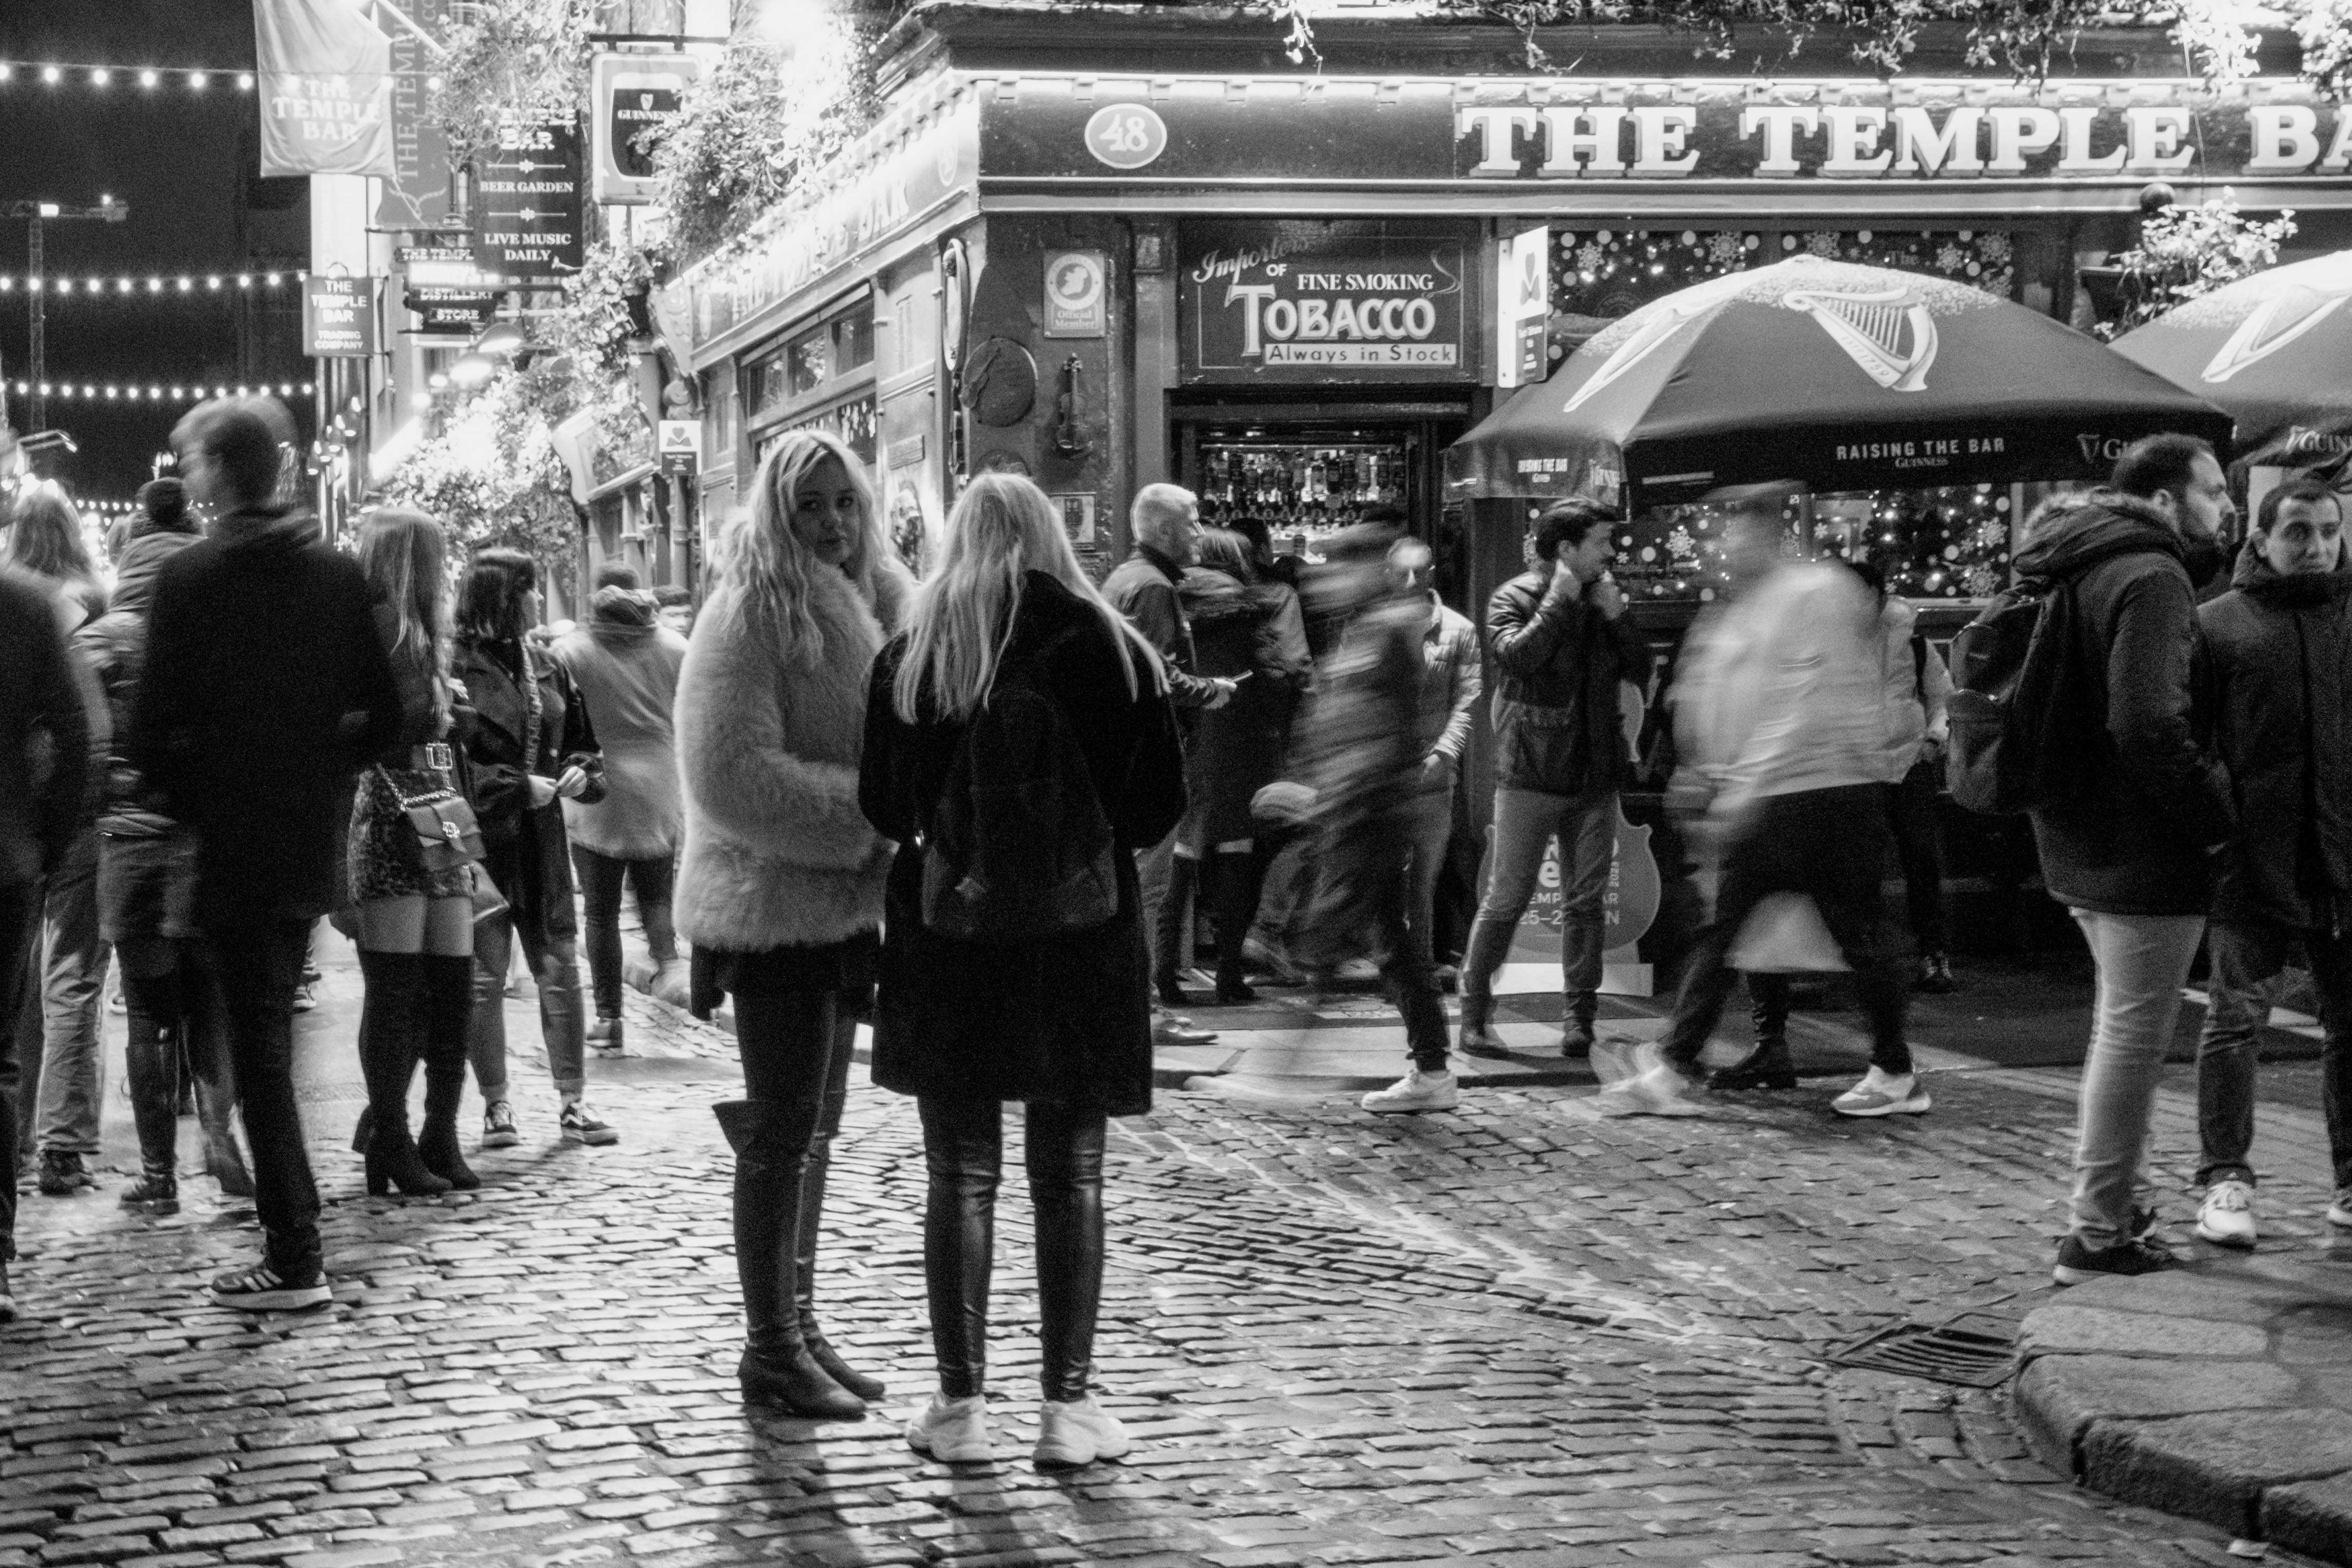 Two women in conversation outside of Temple Bar while the street is buzzing. One of them is looking at something behind her.